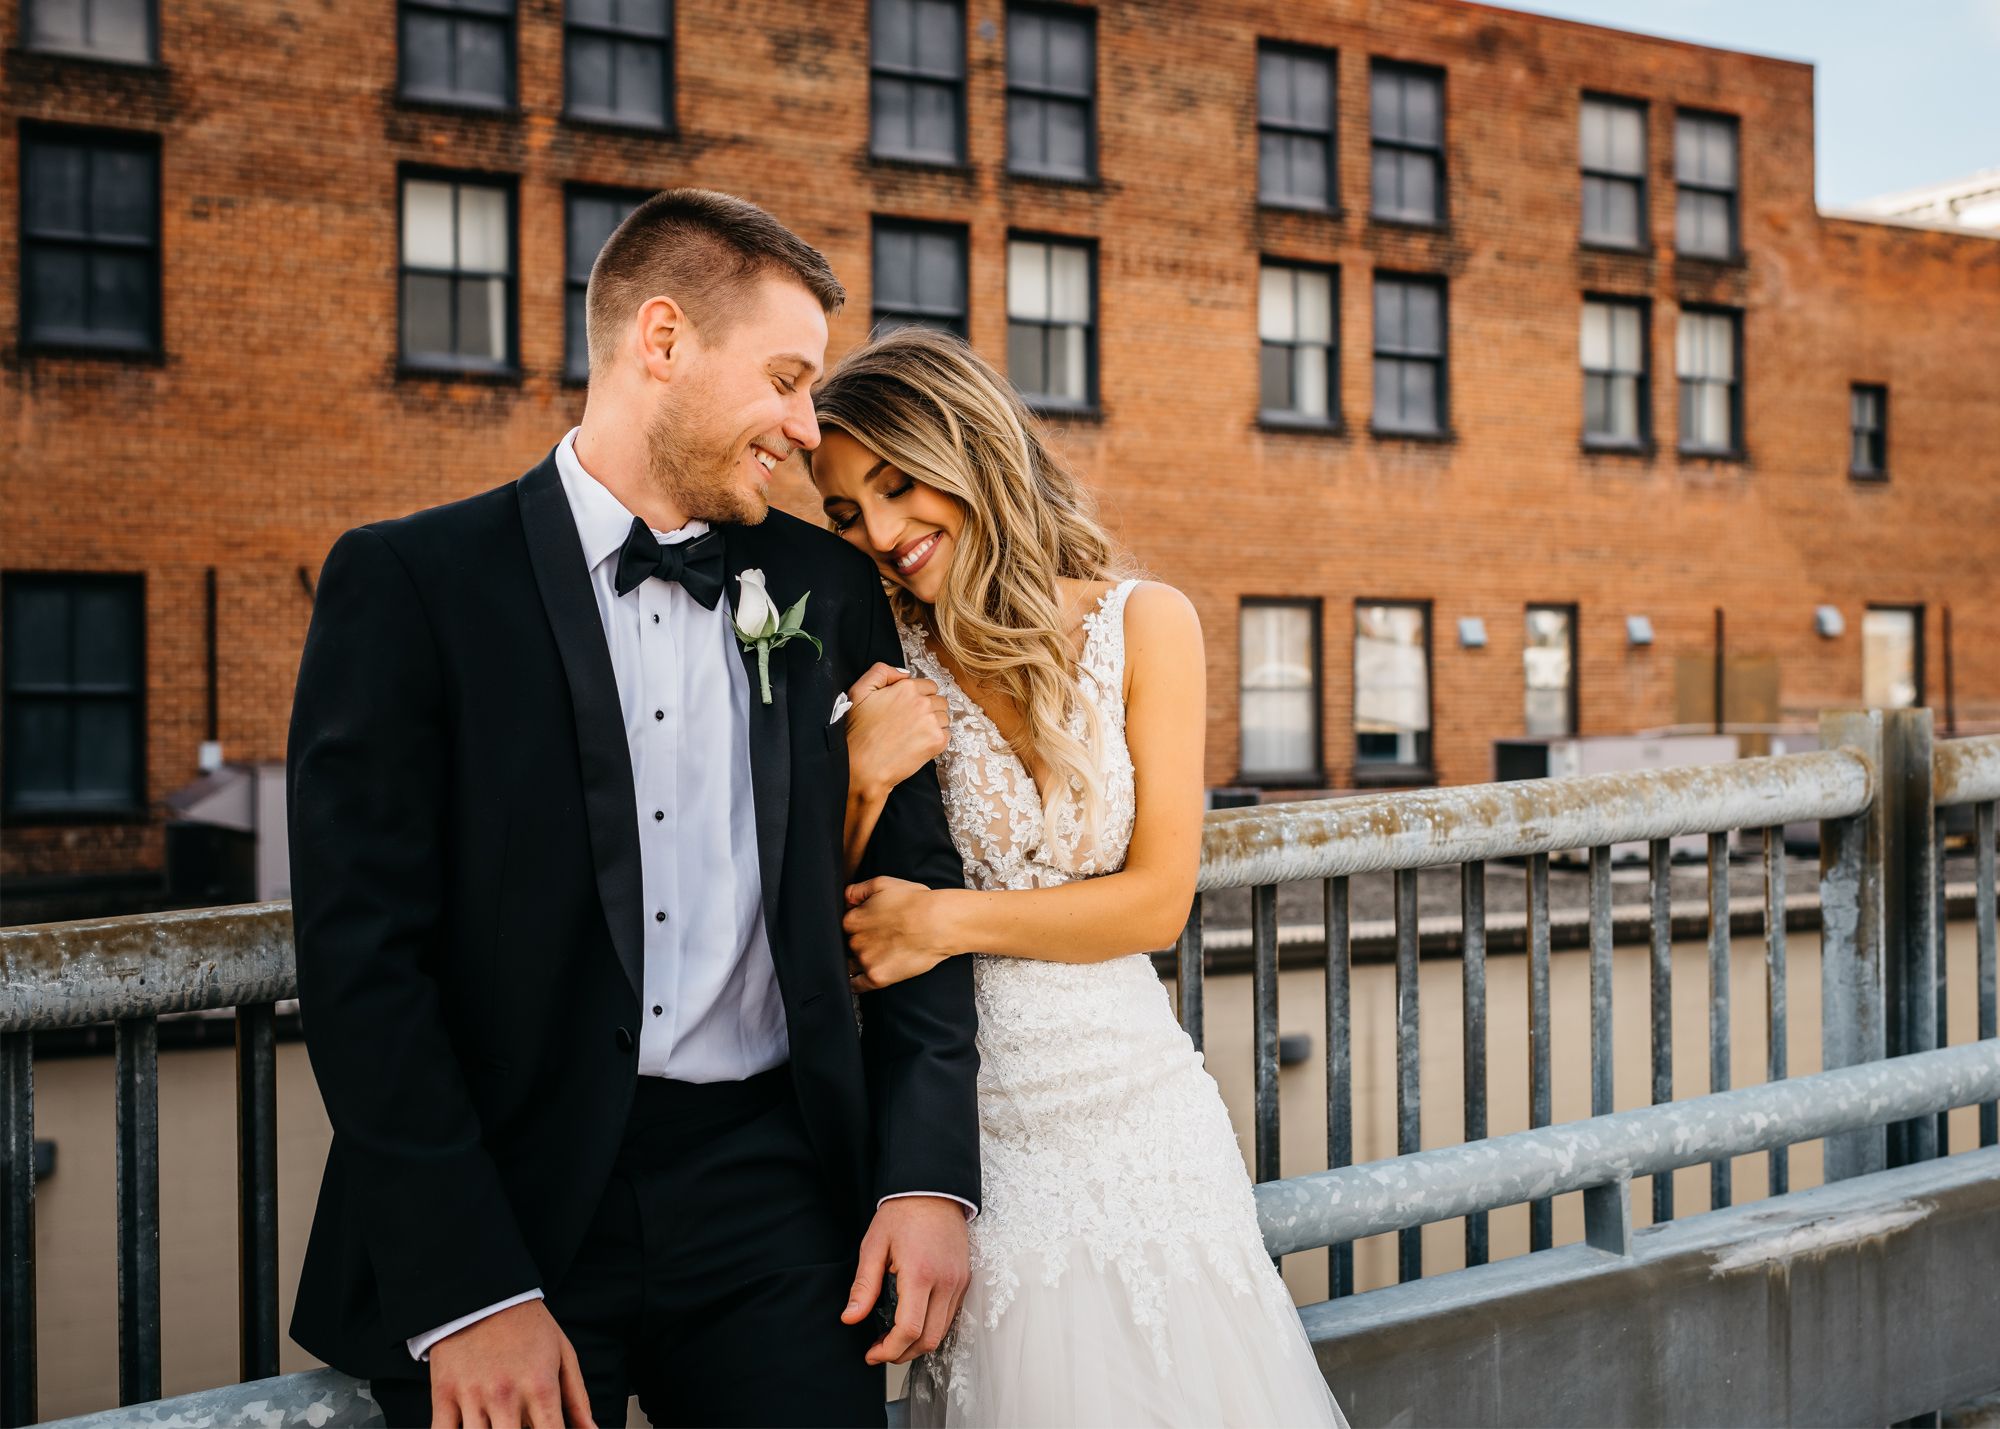 groom in black tuxedo and bride embracing in front of brick building